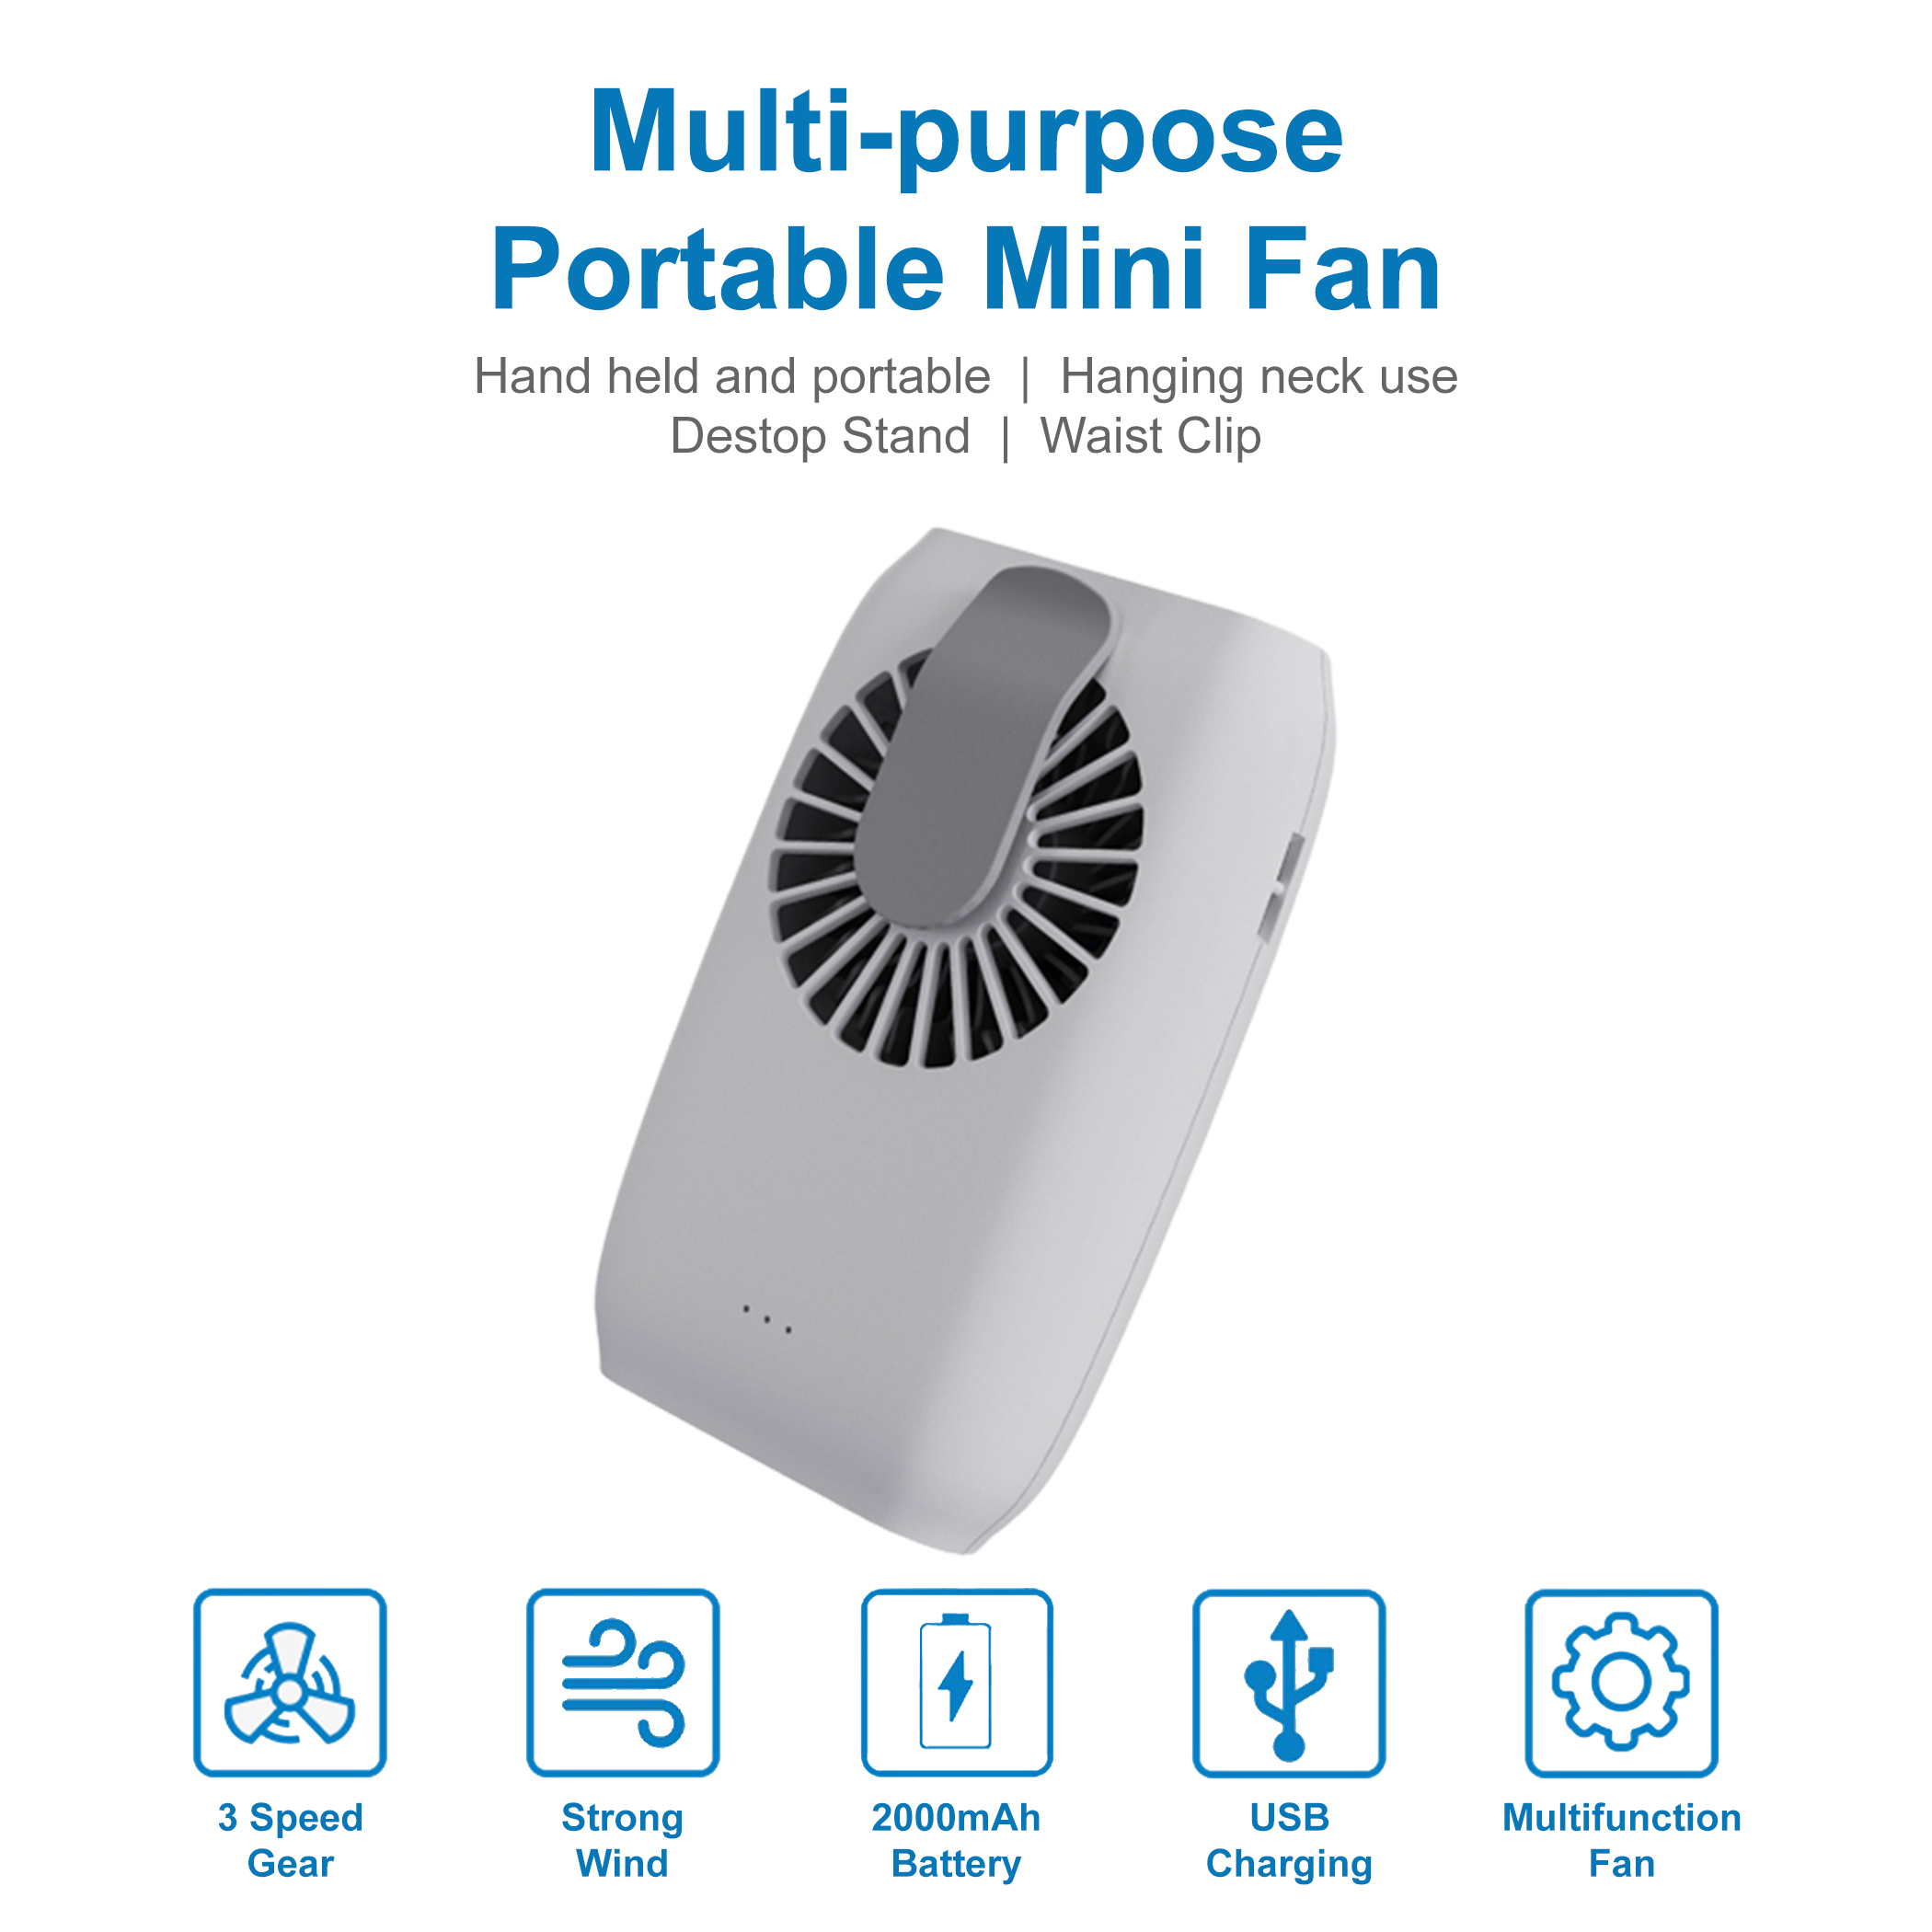  Slirceods Filter Compatible with Xiaomi Mi Air Purifier 3C 3H  3, 2C 2H 2S, Pro, Part Number M8R-FLH,Compatible with Smartmi Air Purifier  Large room, For Model Number : KQJHQ01ZM : Home